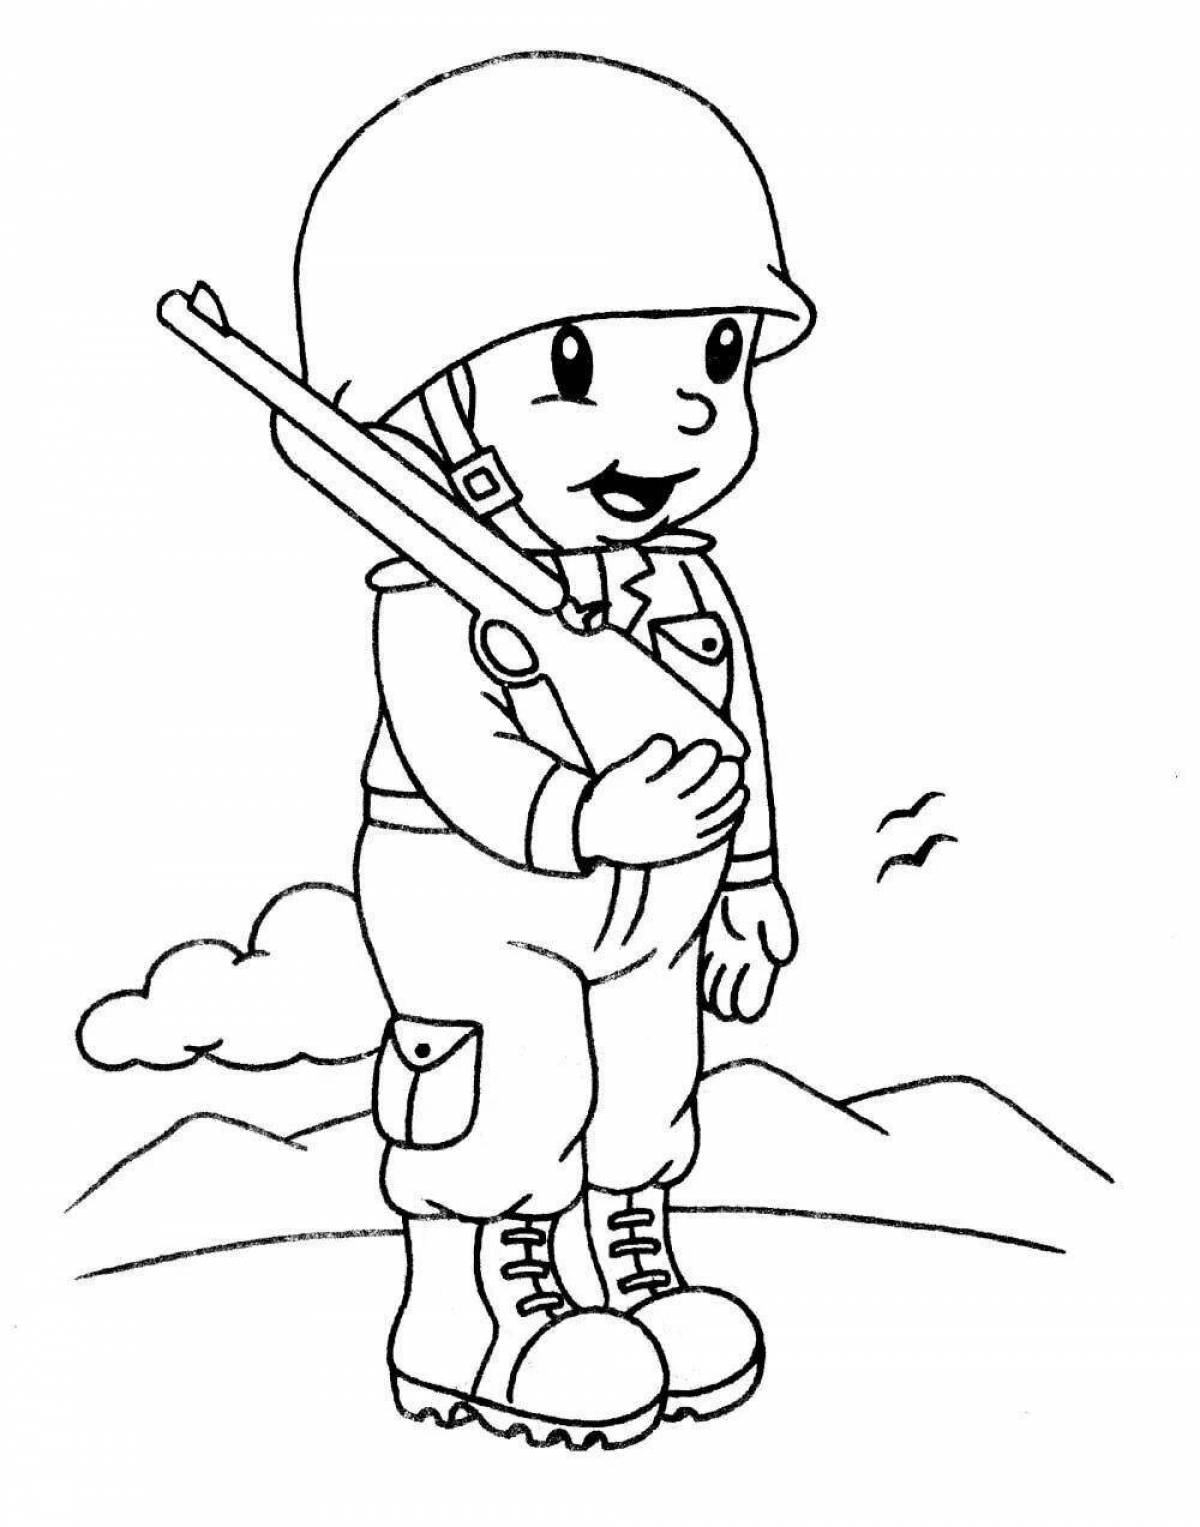 Soldier drawing #12